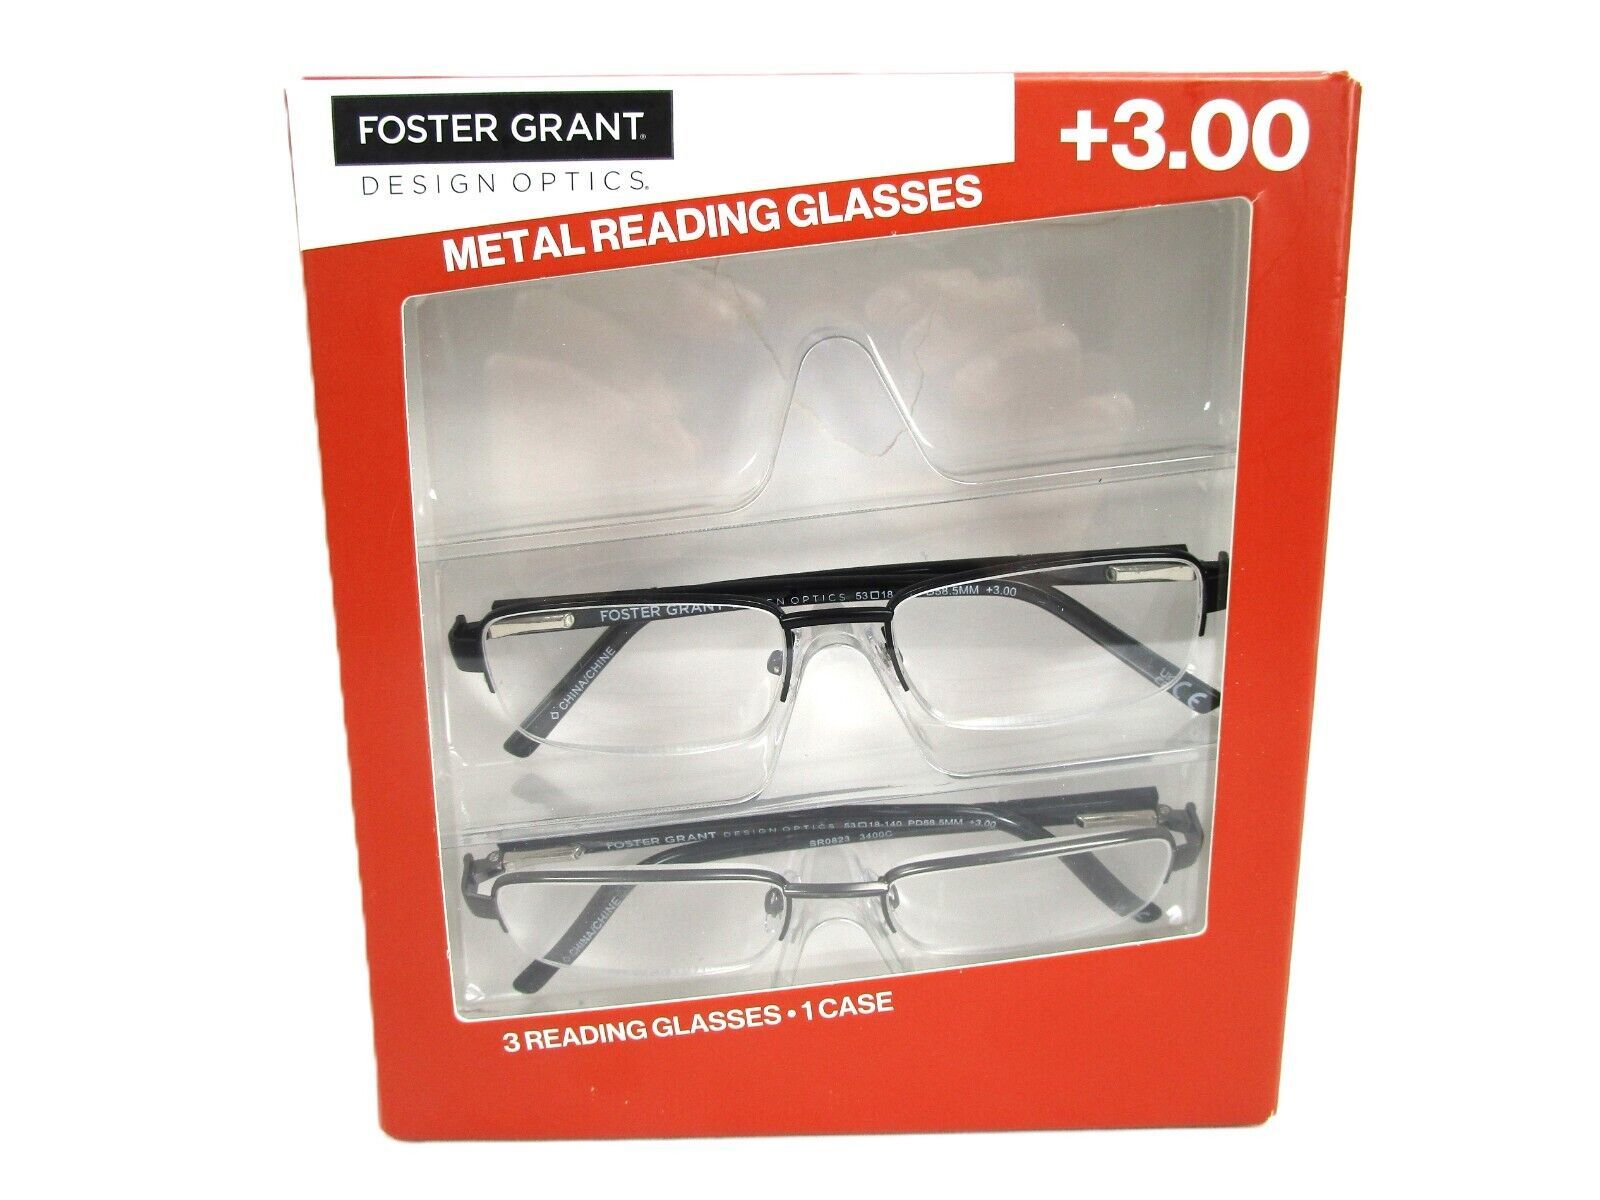 Primary image for Foster Grant +3.00 Metal Reading Glasses 2-Pack UVA-UVB Lens Protection